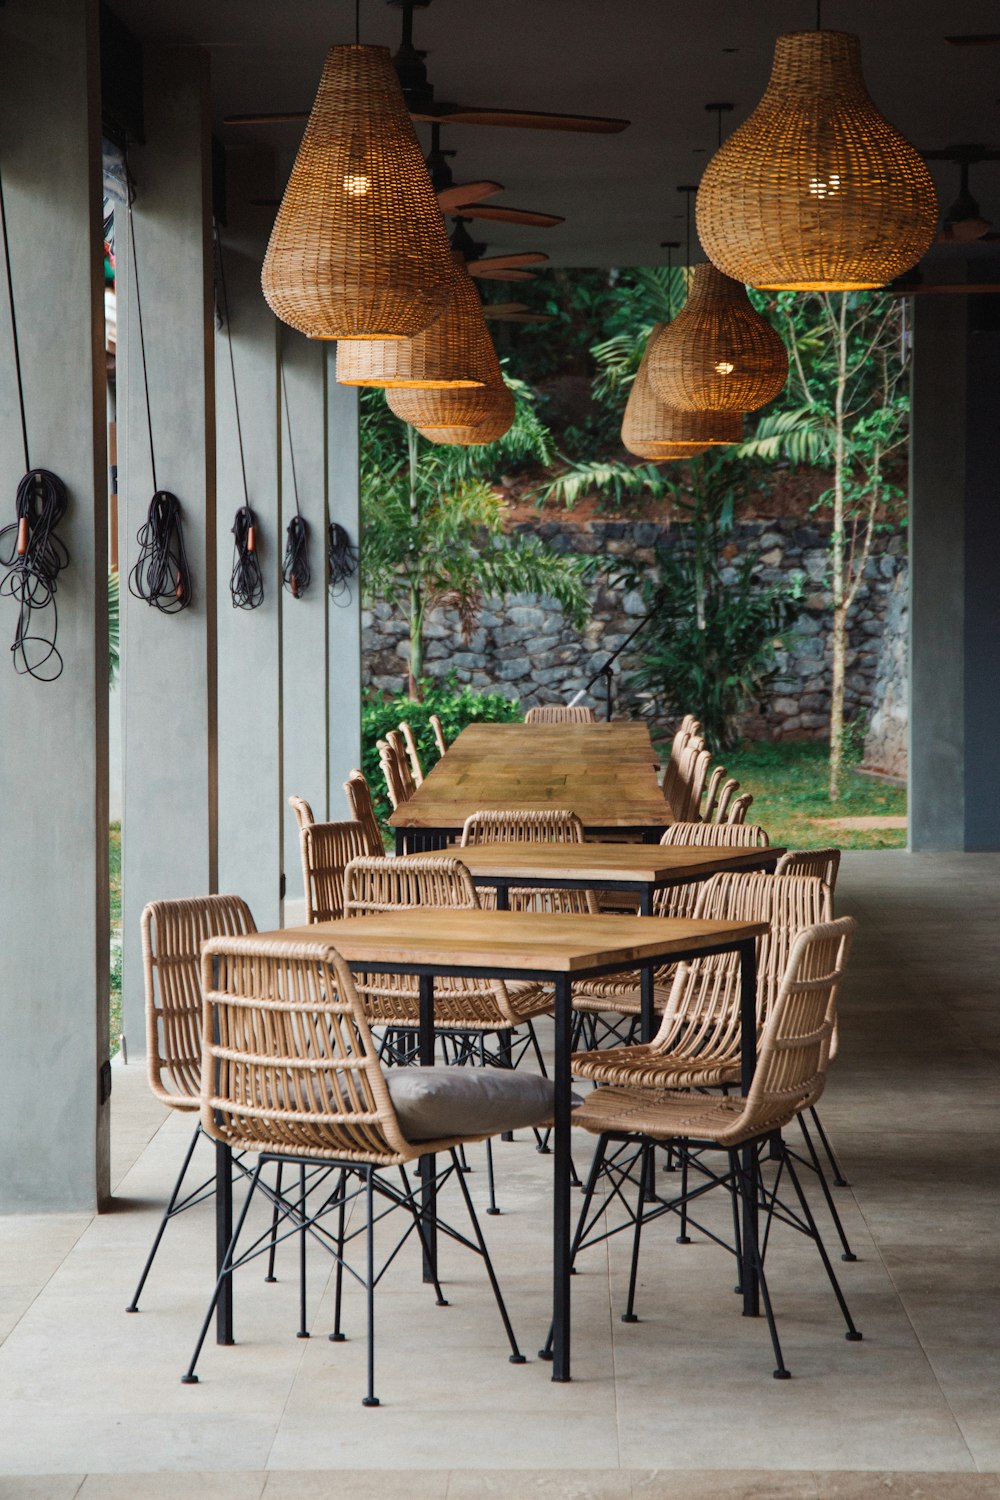 brown wicker chairs and table